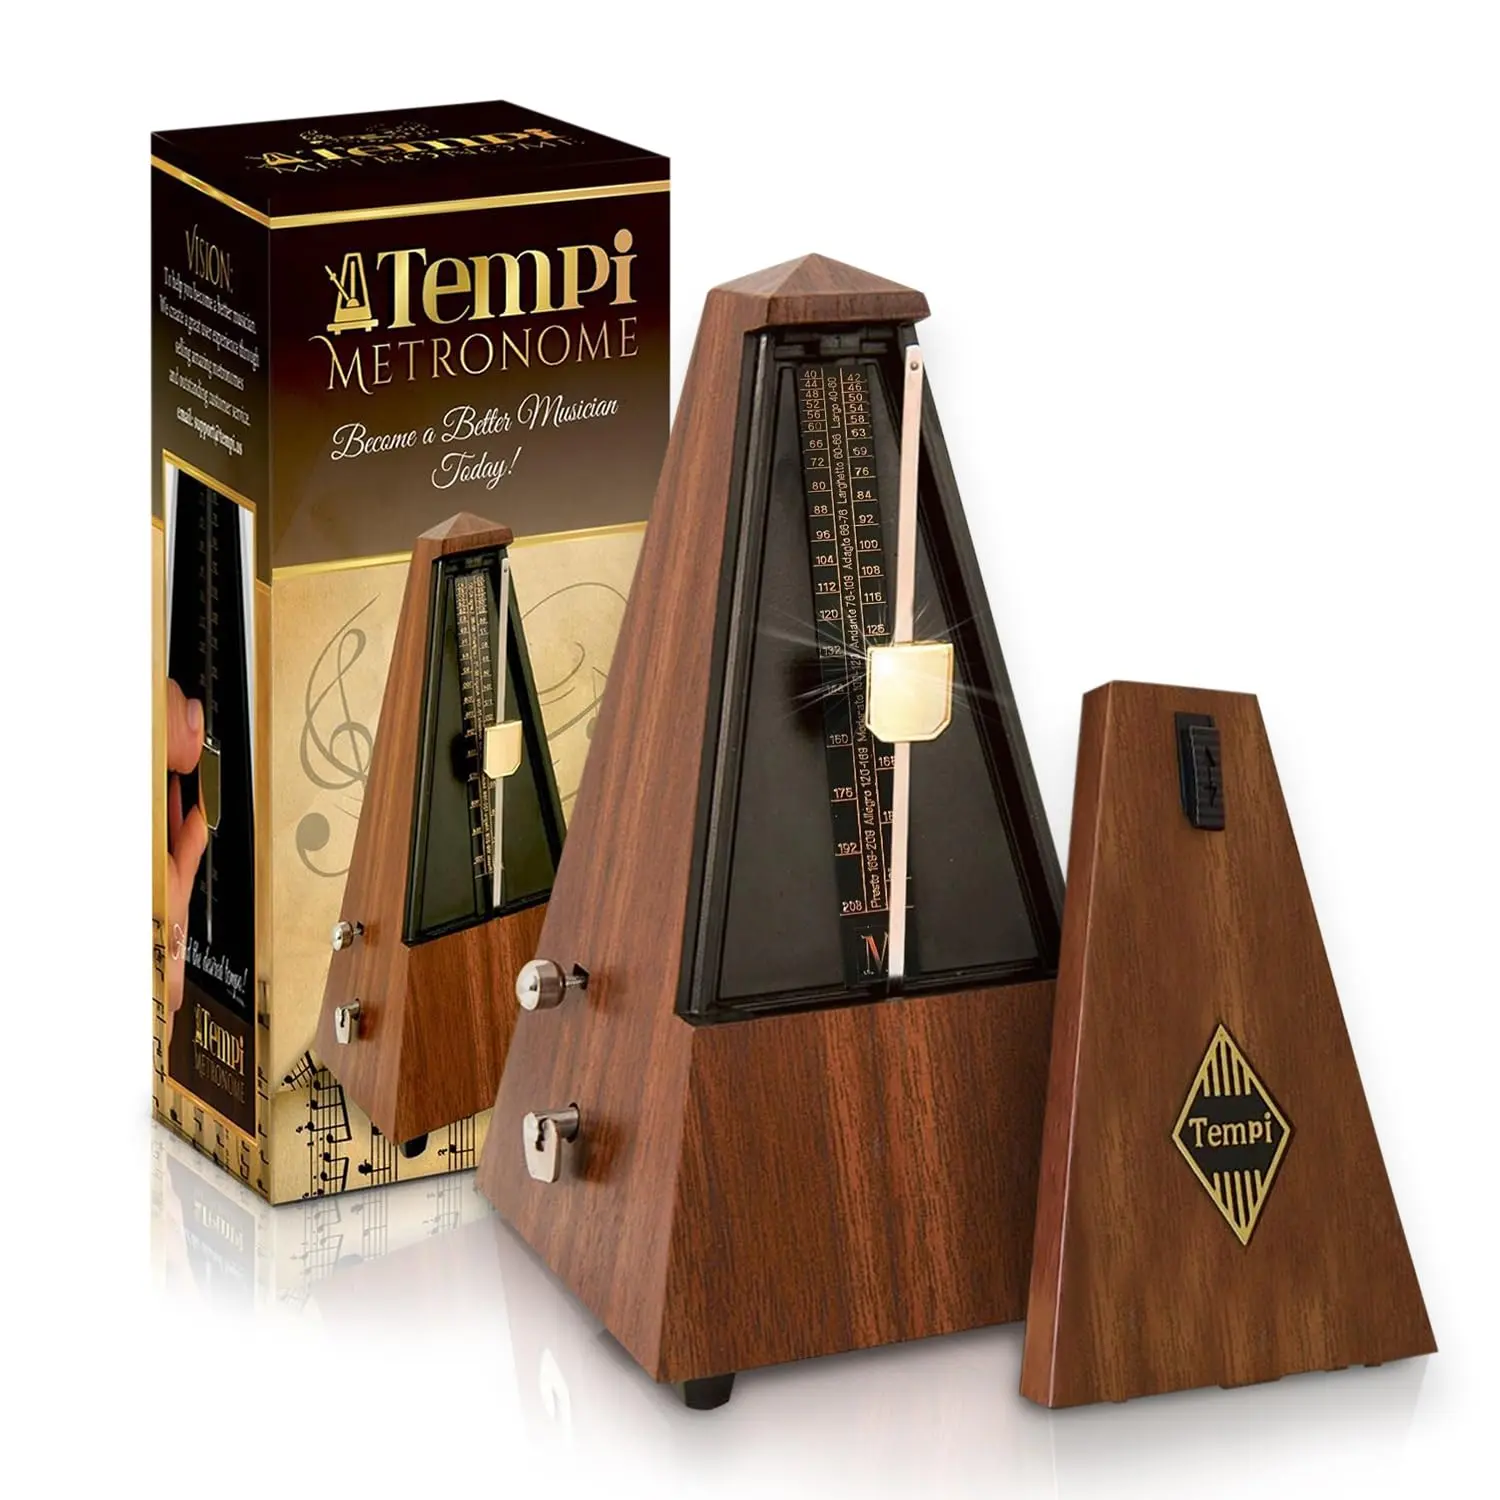 best metronome for violin - Do you need a metronome for violin